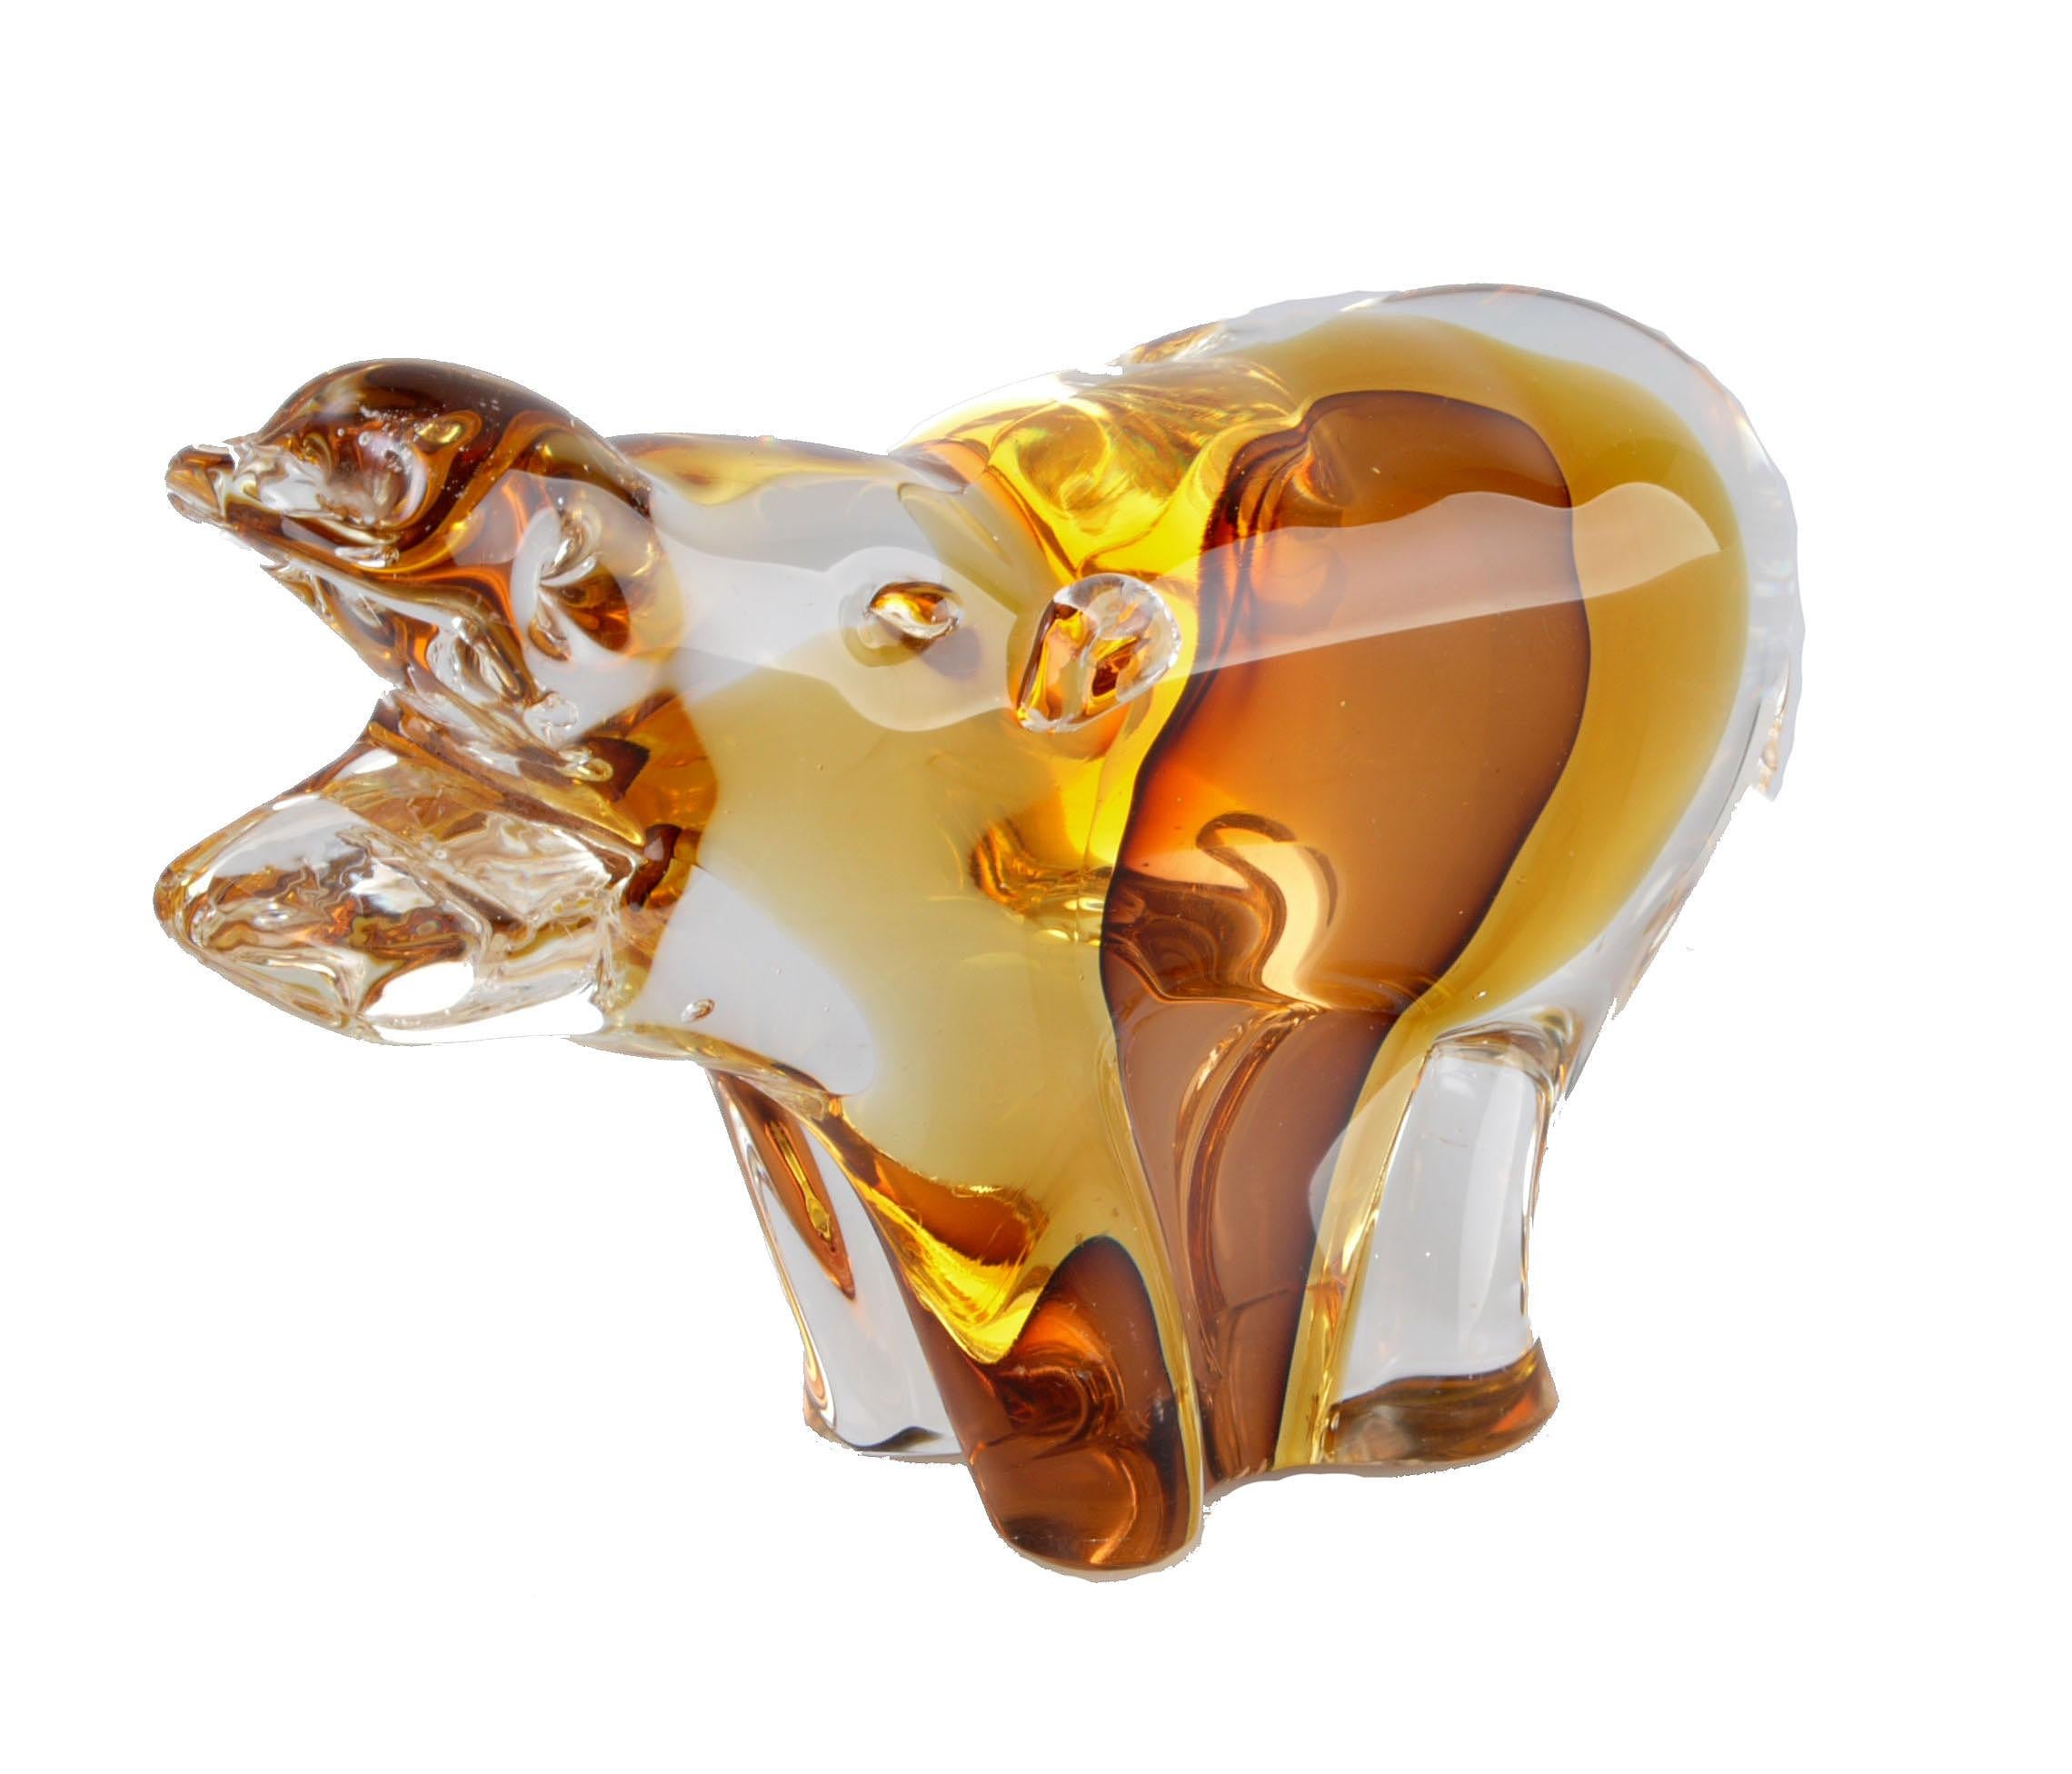 Lovely Italian blown Murano art glass hippopotamus in clear and amber glass, River Horse, Hippo.
One of a kind animal glass sculpture.